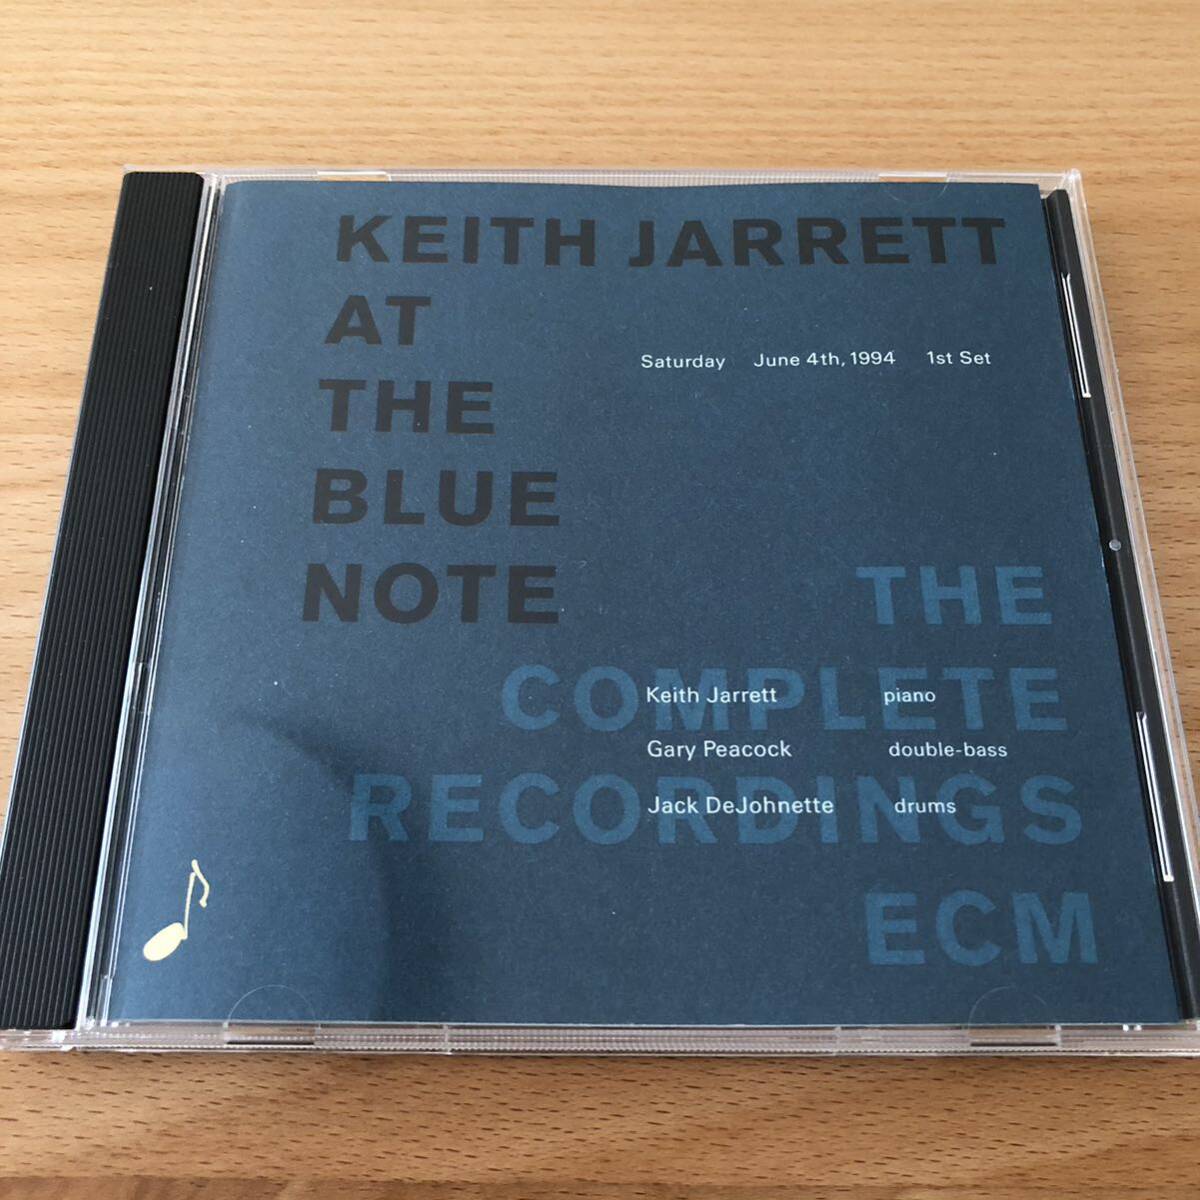 【CD】キース・ジャレット／AT THE BLUE NOTE〜SATURDAY, JUNE 4TH 1994 1ST SET_画像1